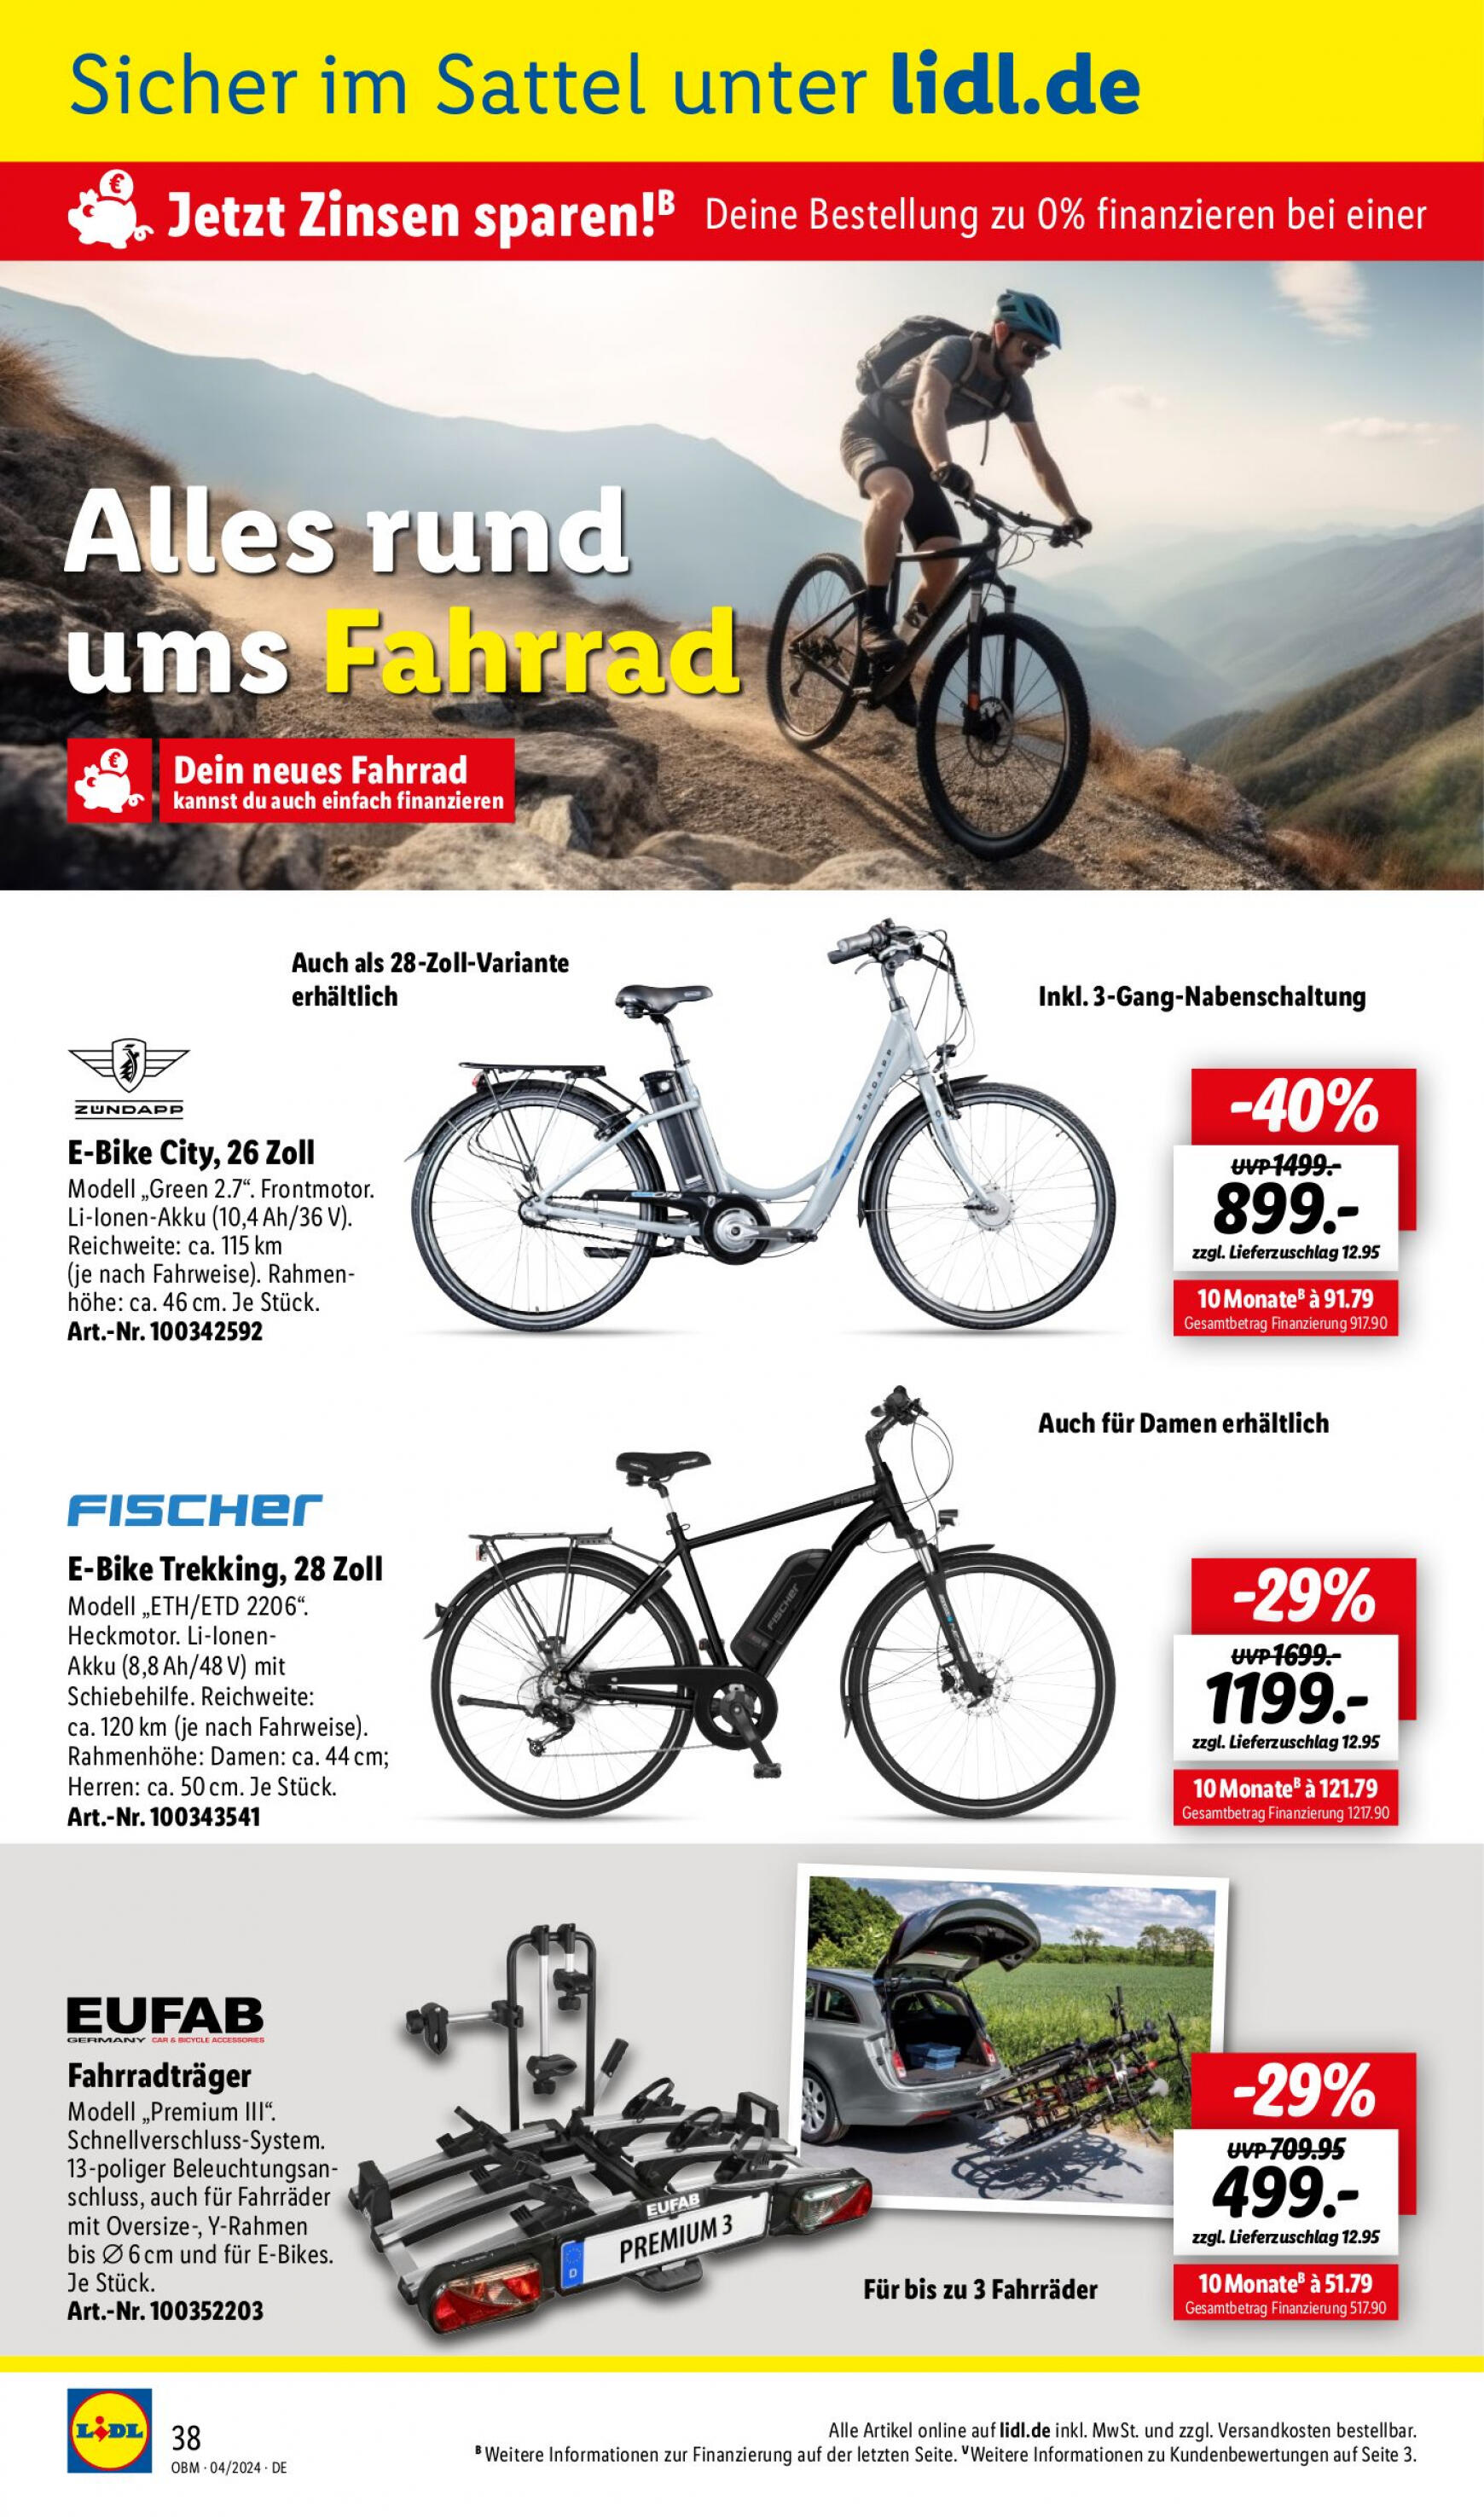 lidl - Flyer Lidl - Aktuelle Onlineshop-Highlights aktuell 01.04. - 30.04. - page: 38